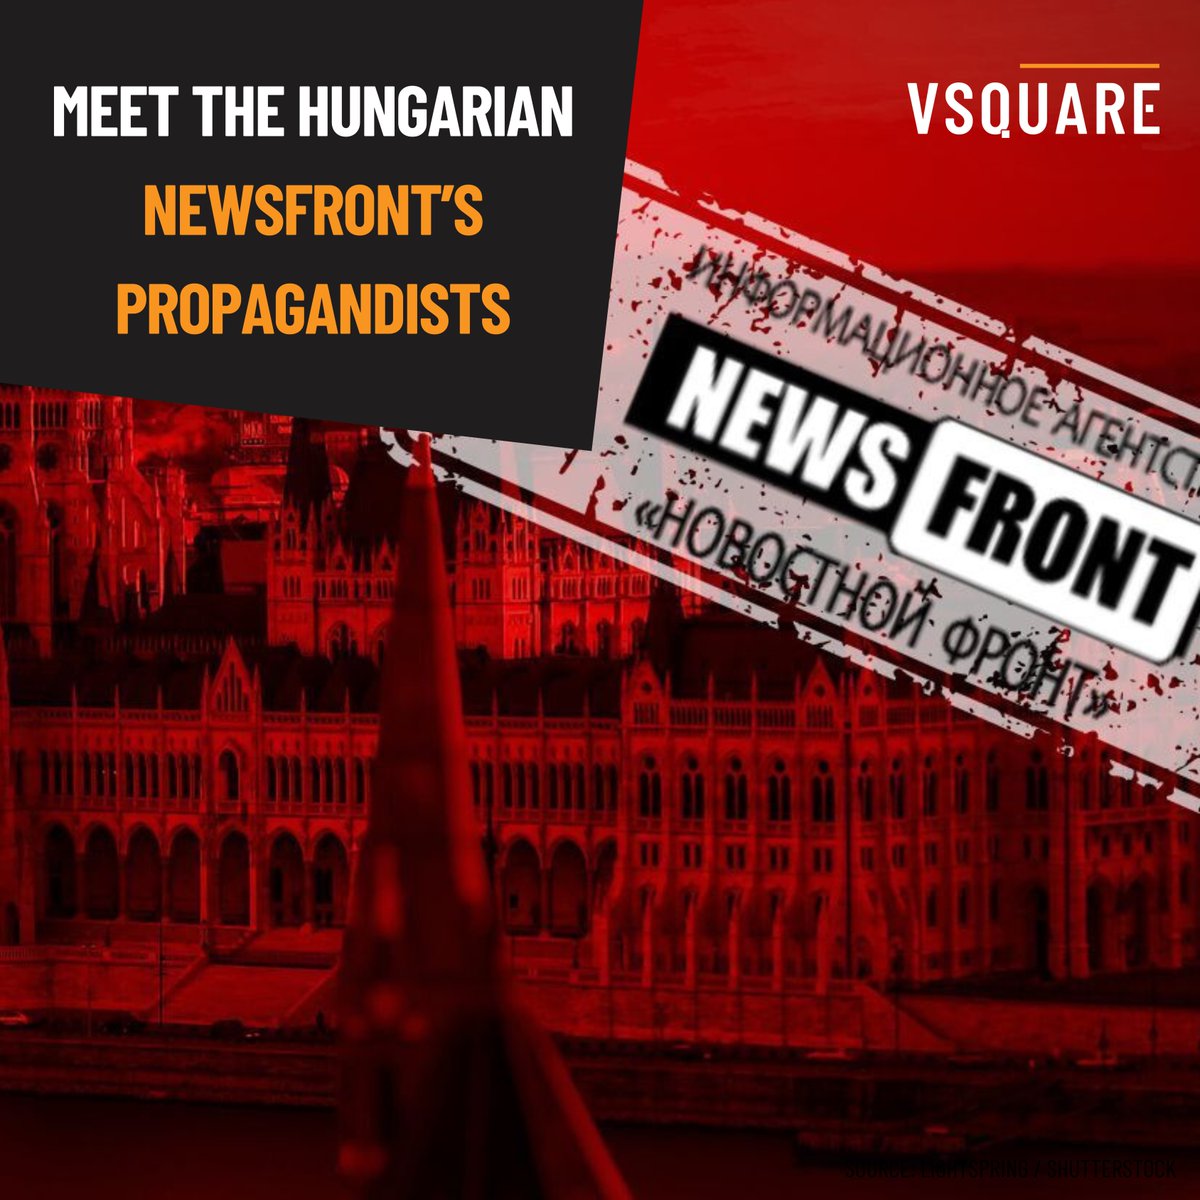 ❗🇭🇺 Hungarian NewsFront is back to full operation again. They have little room for influence because Hungarian government media/propaganda outlets themselves spread Kremlin narratives and conspiracies. Read more from @karin_kvr_slyms and @panyiszabolcs: vsquare.org/newsfront-russ…